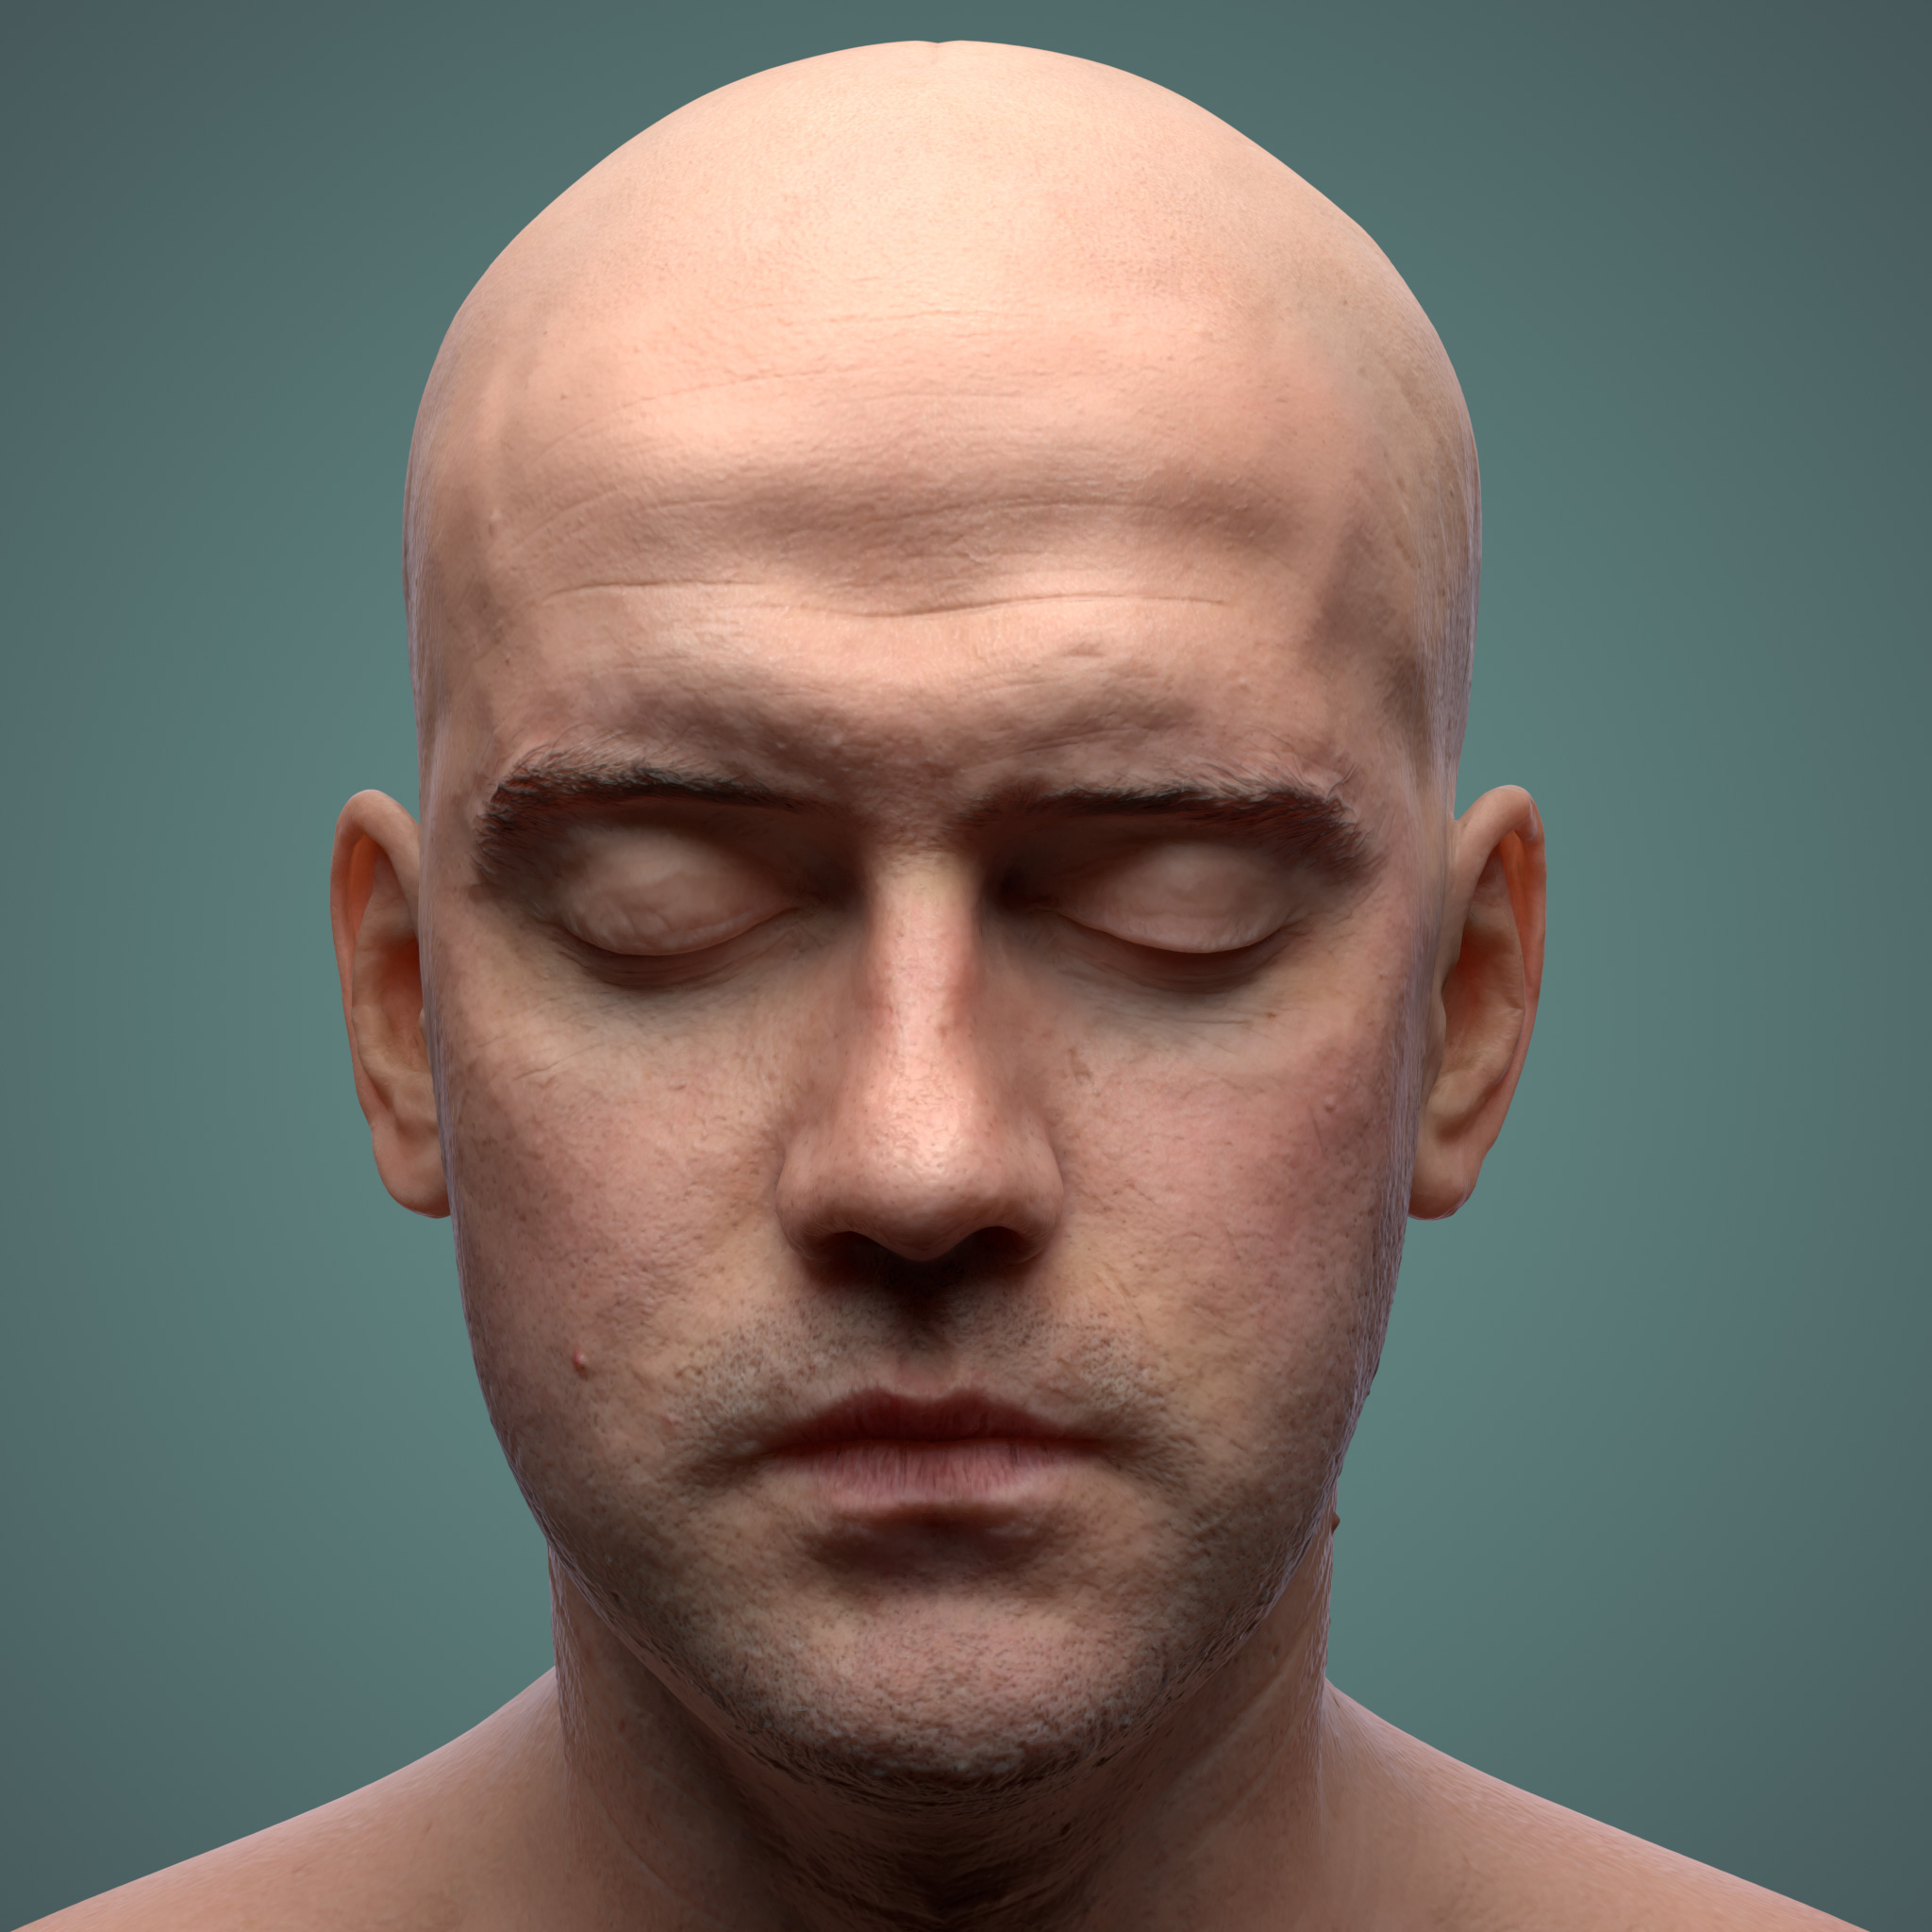 FREE ITEM] How to get the RENDERMAN DYNAMIC HEAD (SCARY)